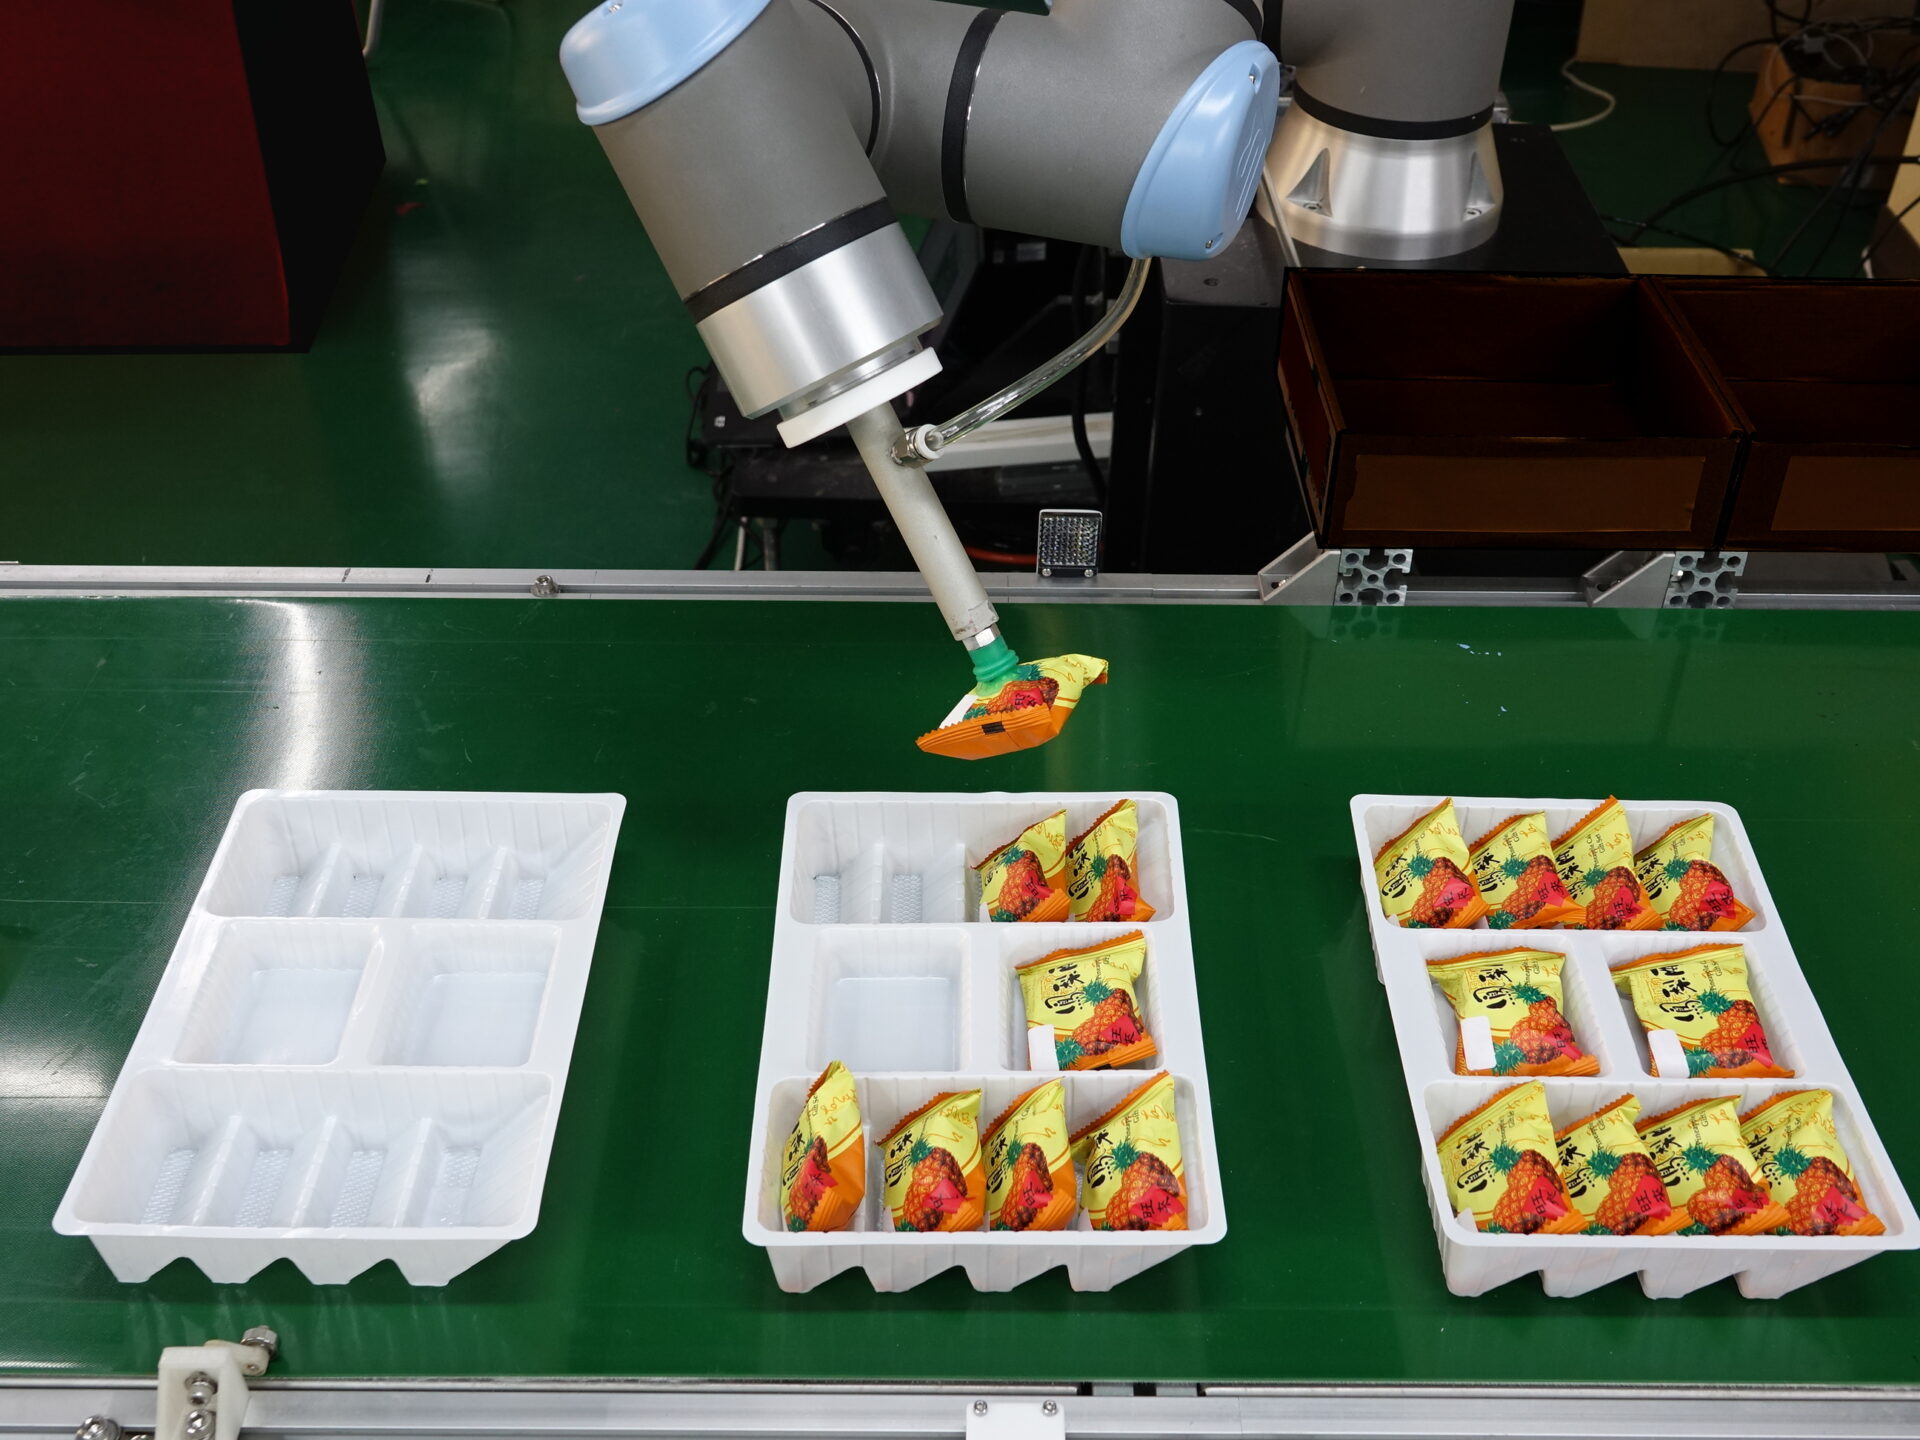 a UR robot arm places snacks into packaging cases on a conveyor